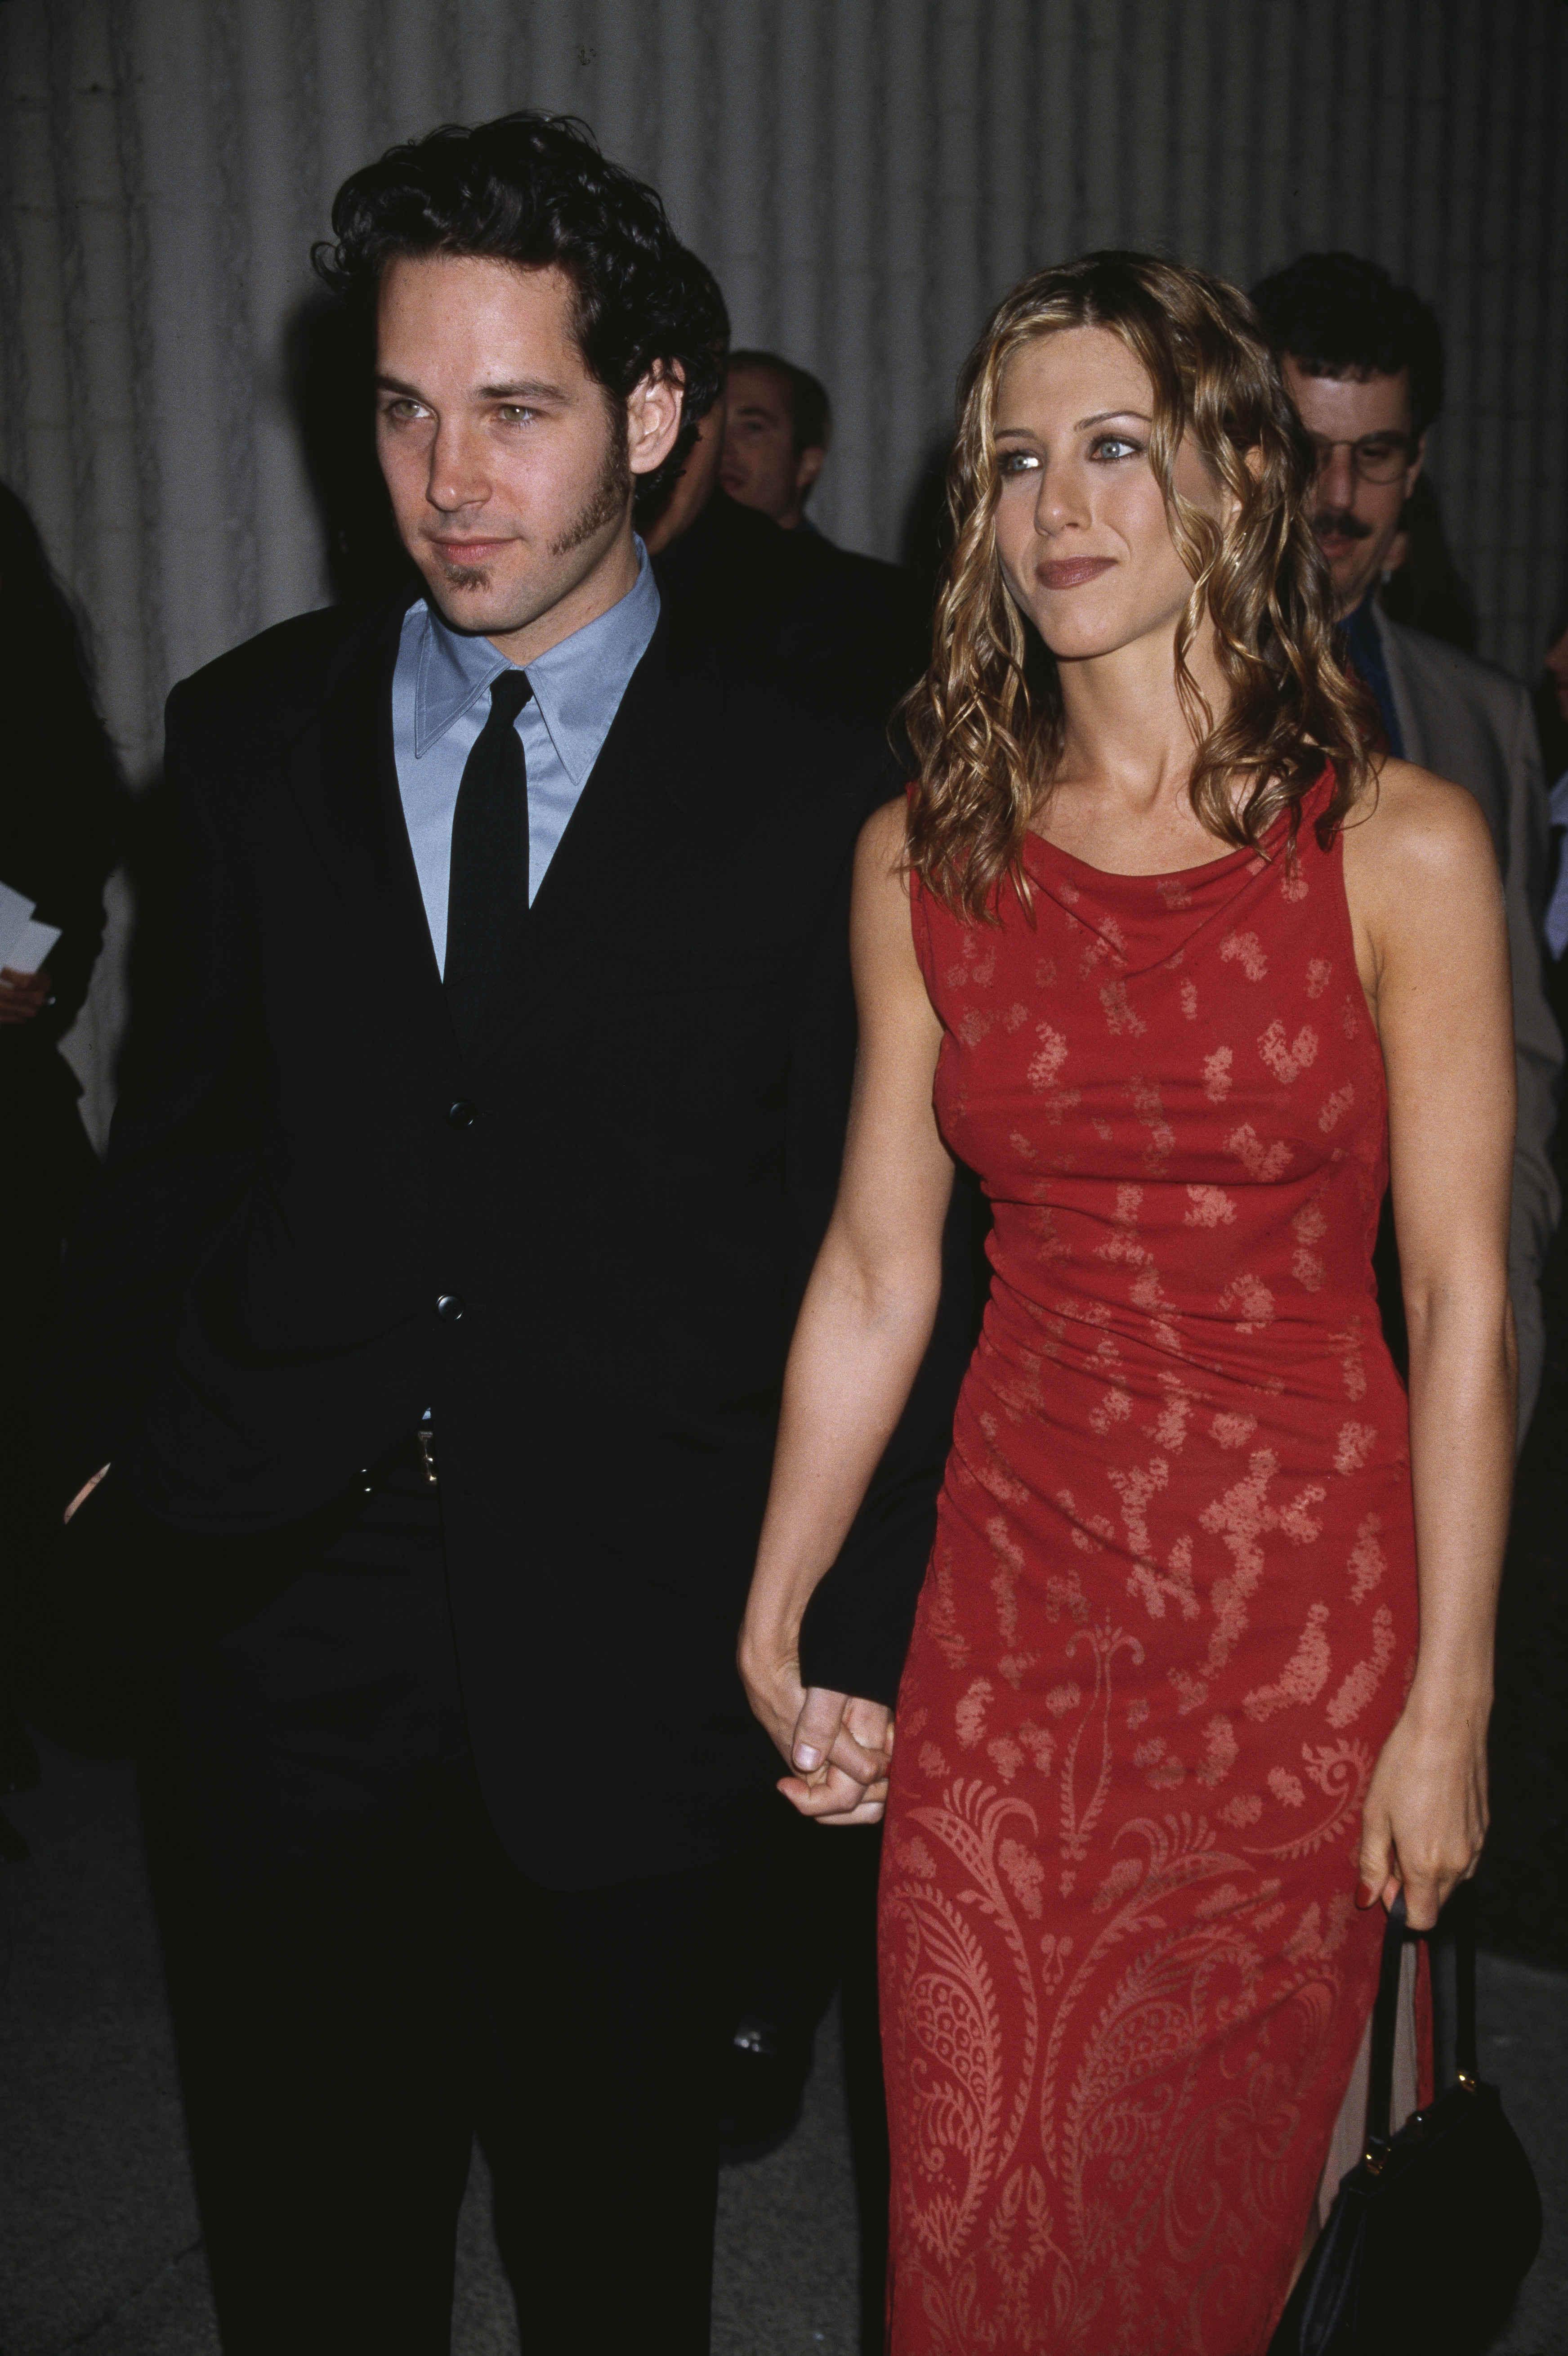 Jennifer Aniston and Paul Rudd at the premiere of "The Object of My Affection," 1998 | Source: Getty Images